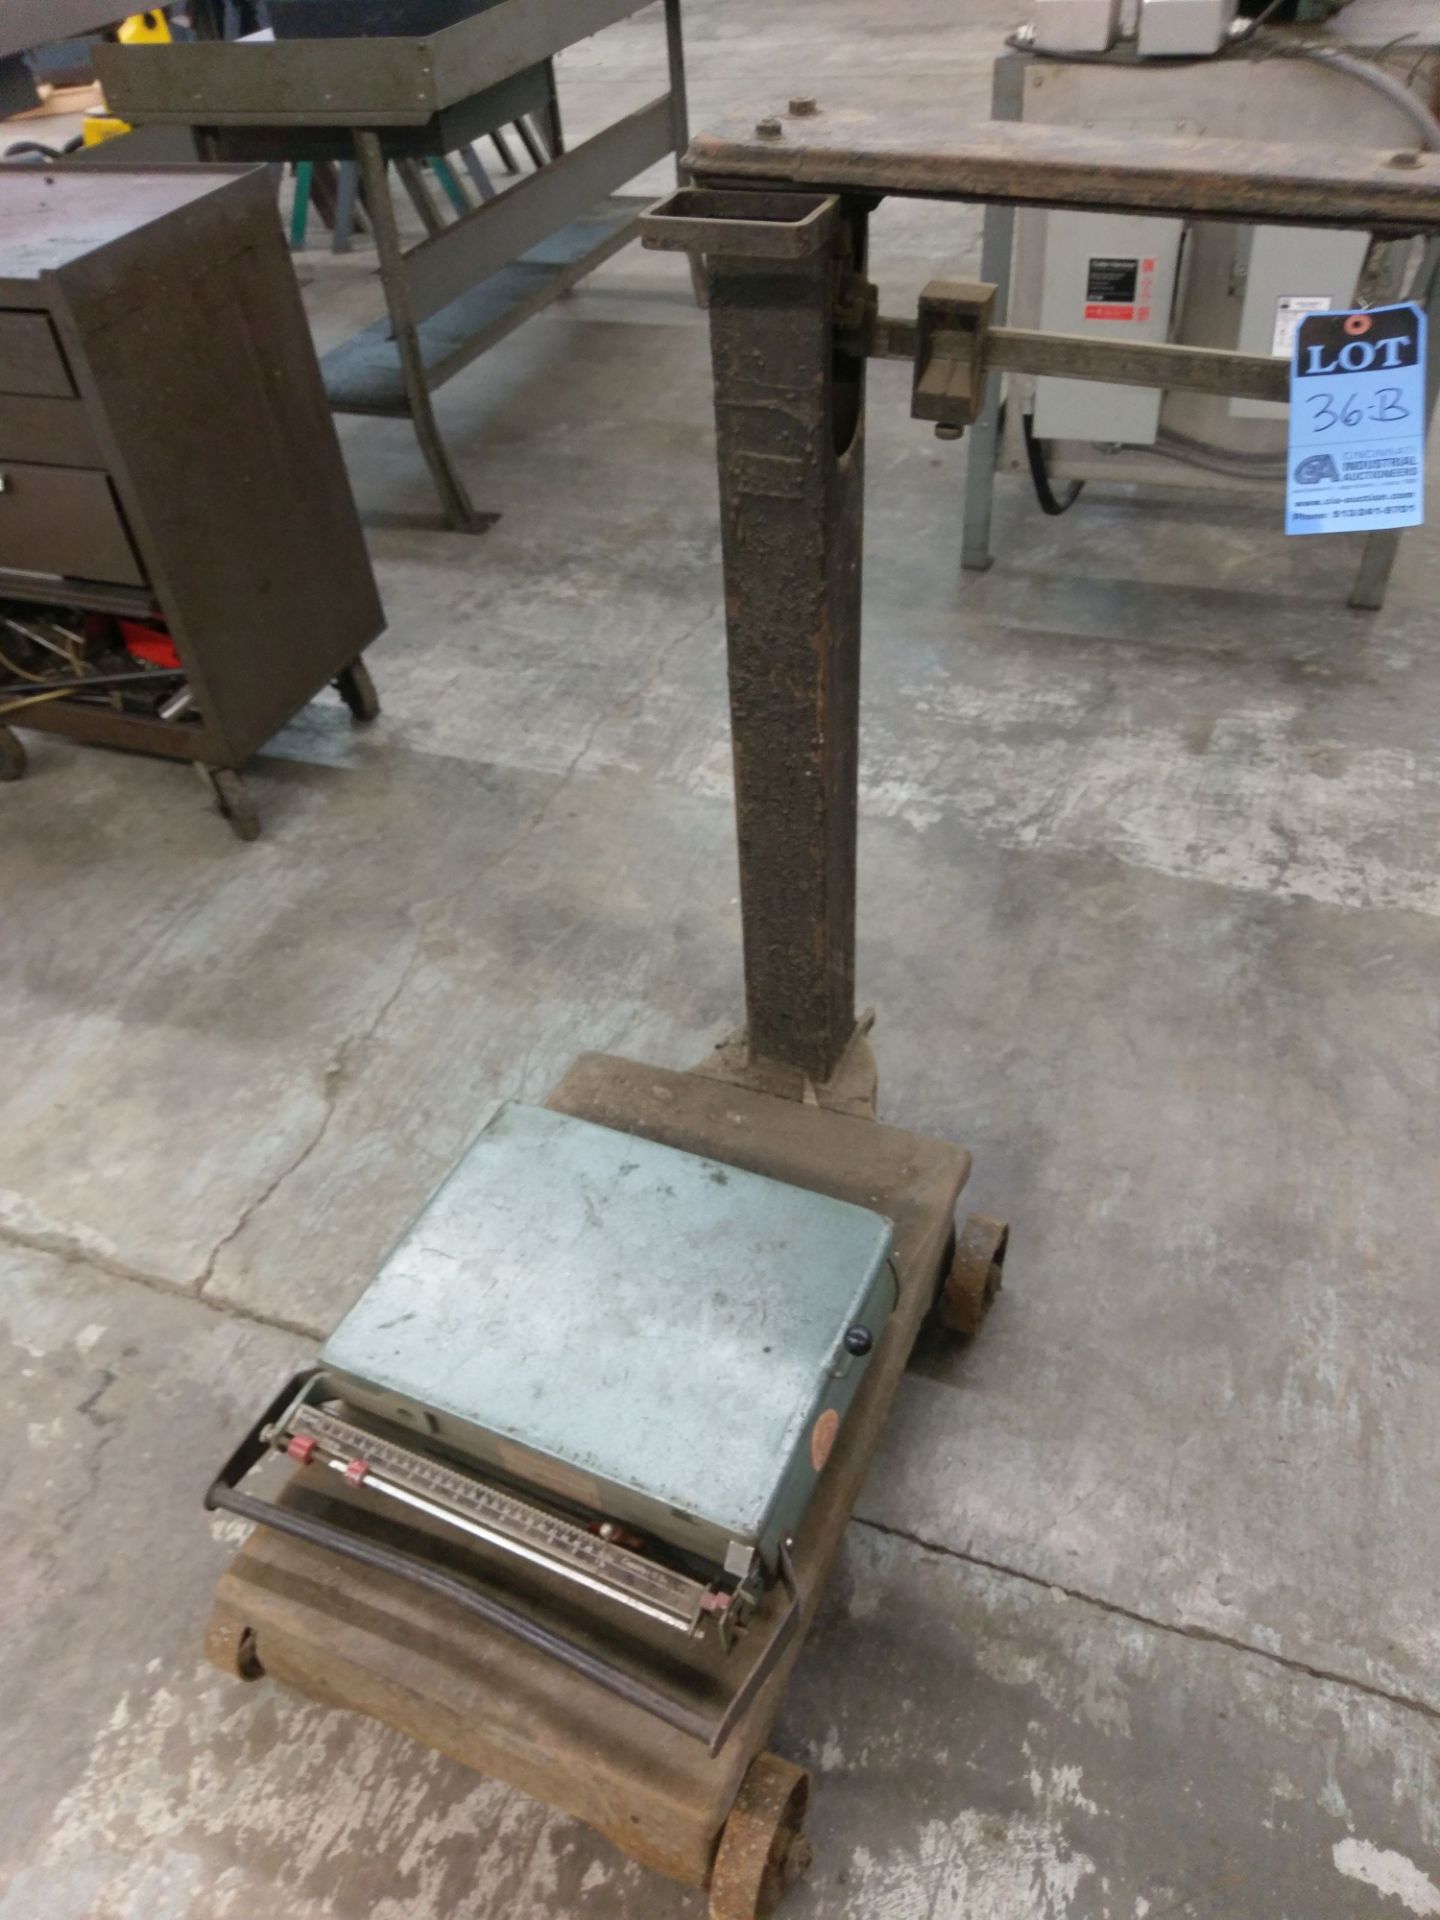 (LOT) (2) WEIGHING SCALES **LOCATED 3201 ALBERTA ST., COLUMBUS, OH 43204**